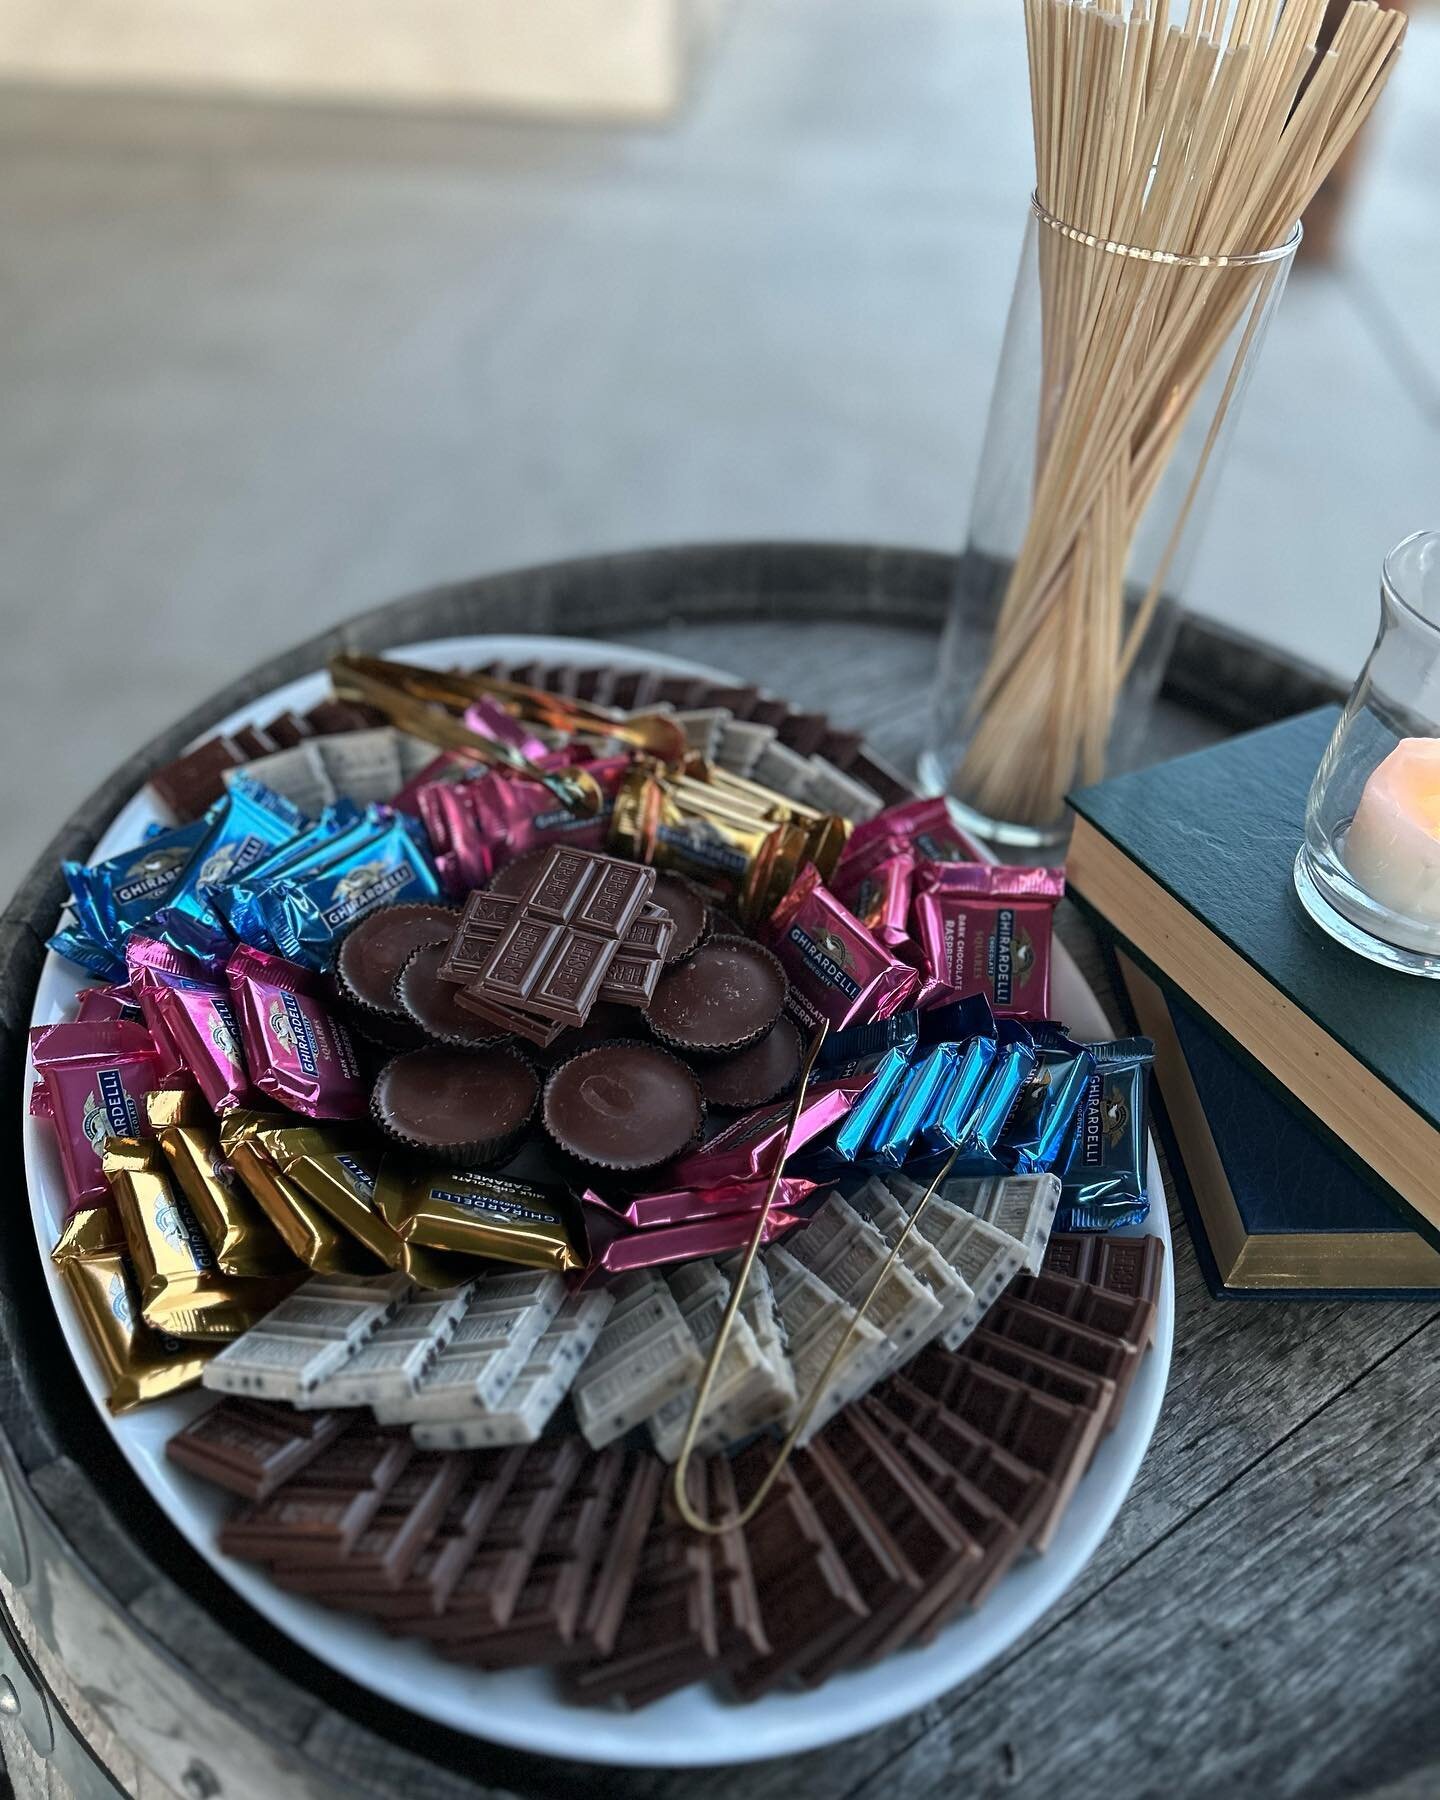 S&rsquo;mores Bar for Intimate Evenings around the 🔥
✨By: Everlong Events